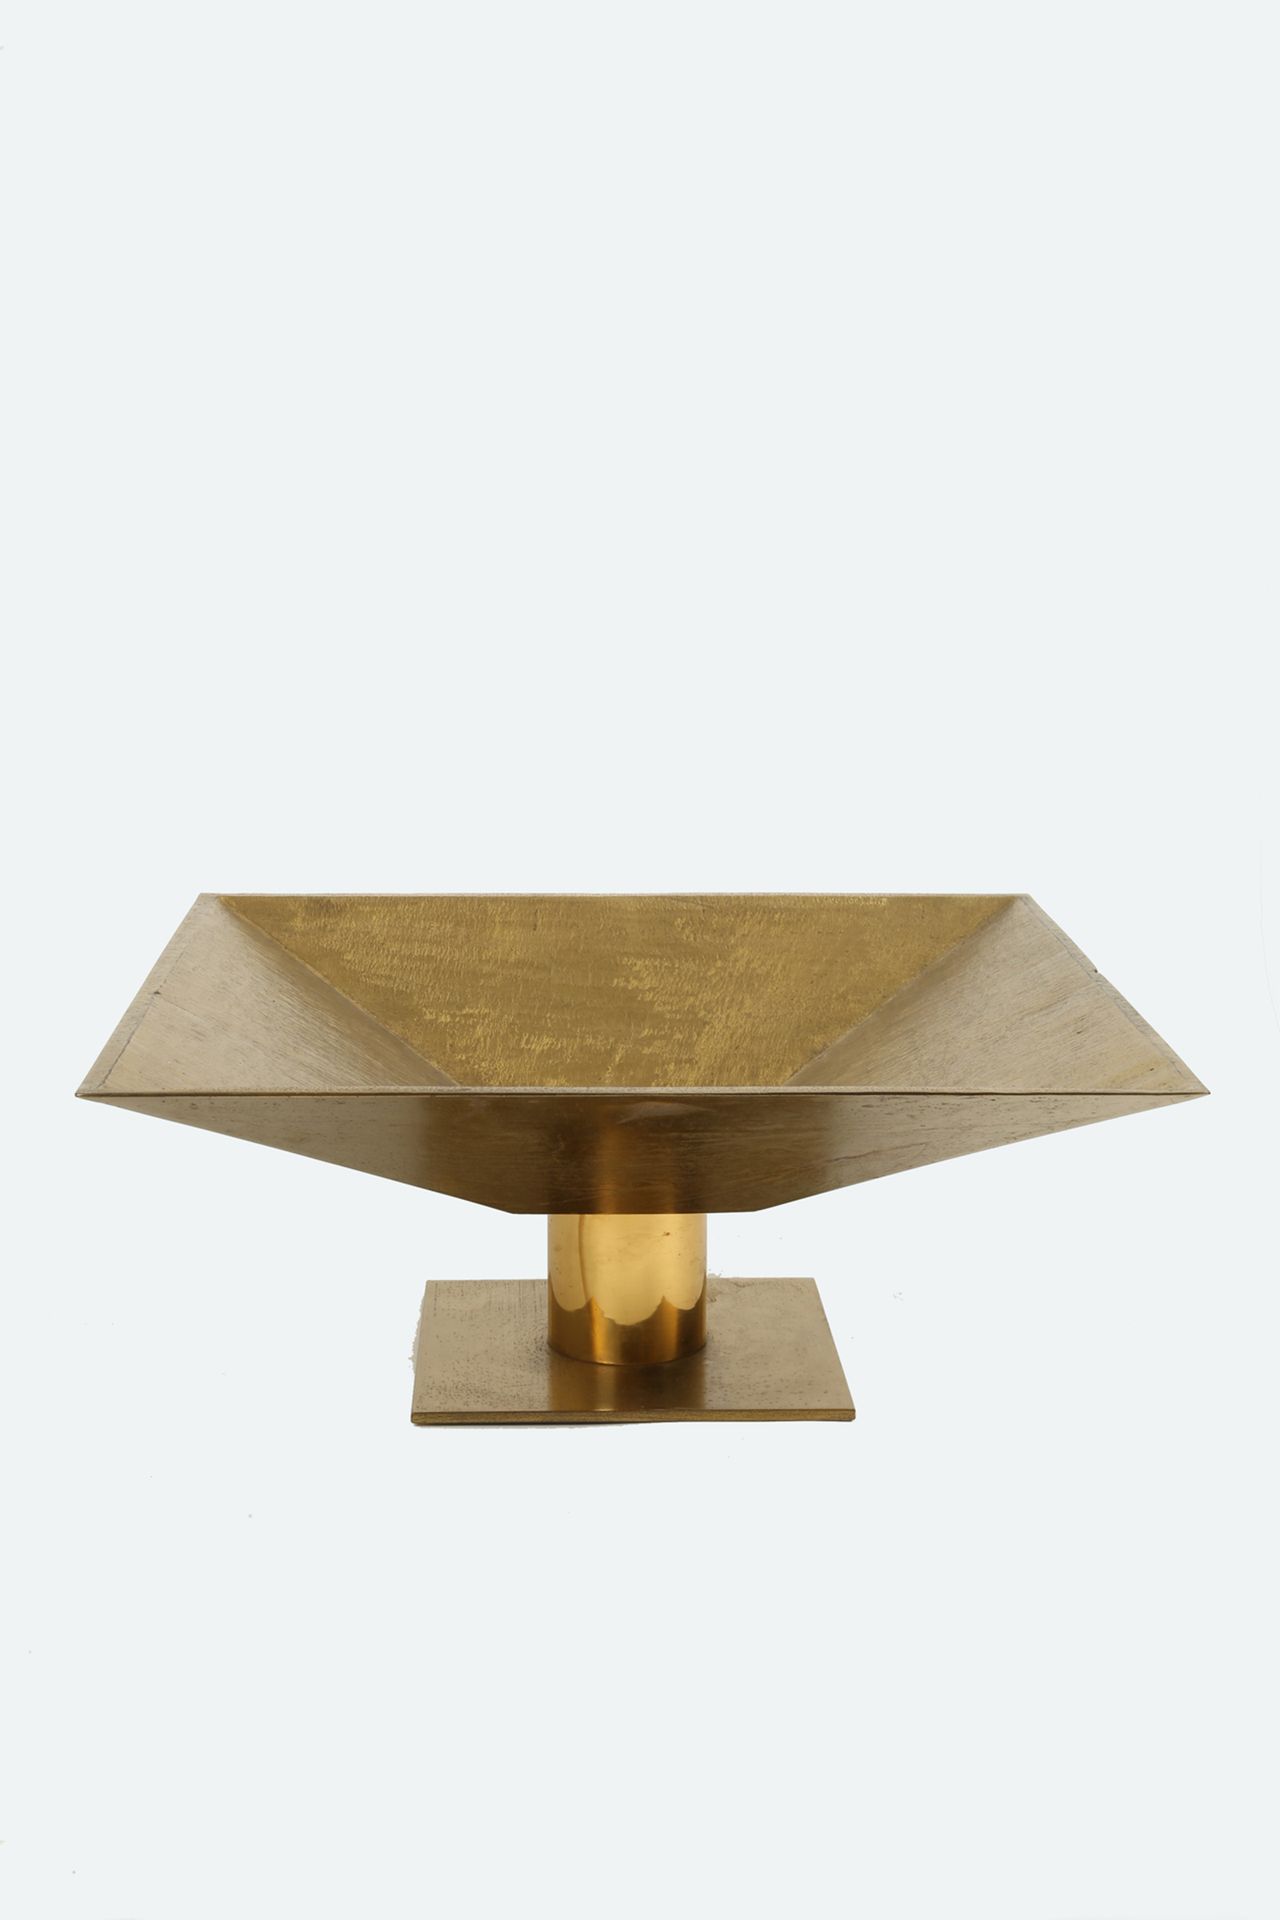 Golden-plated bronze centrepiece. 20th century Gilt and satin-finished bronze ce&hellip;